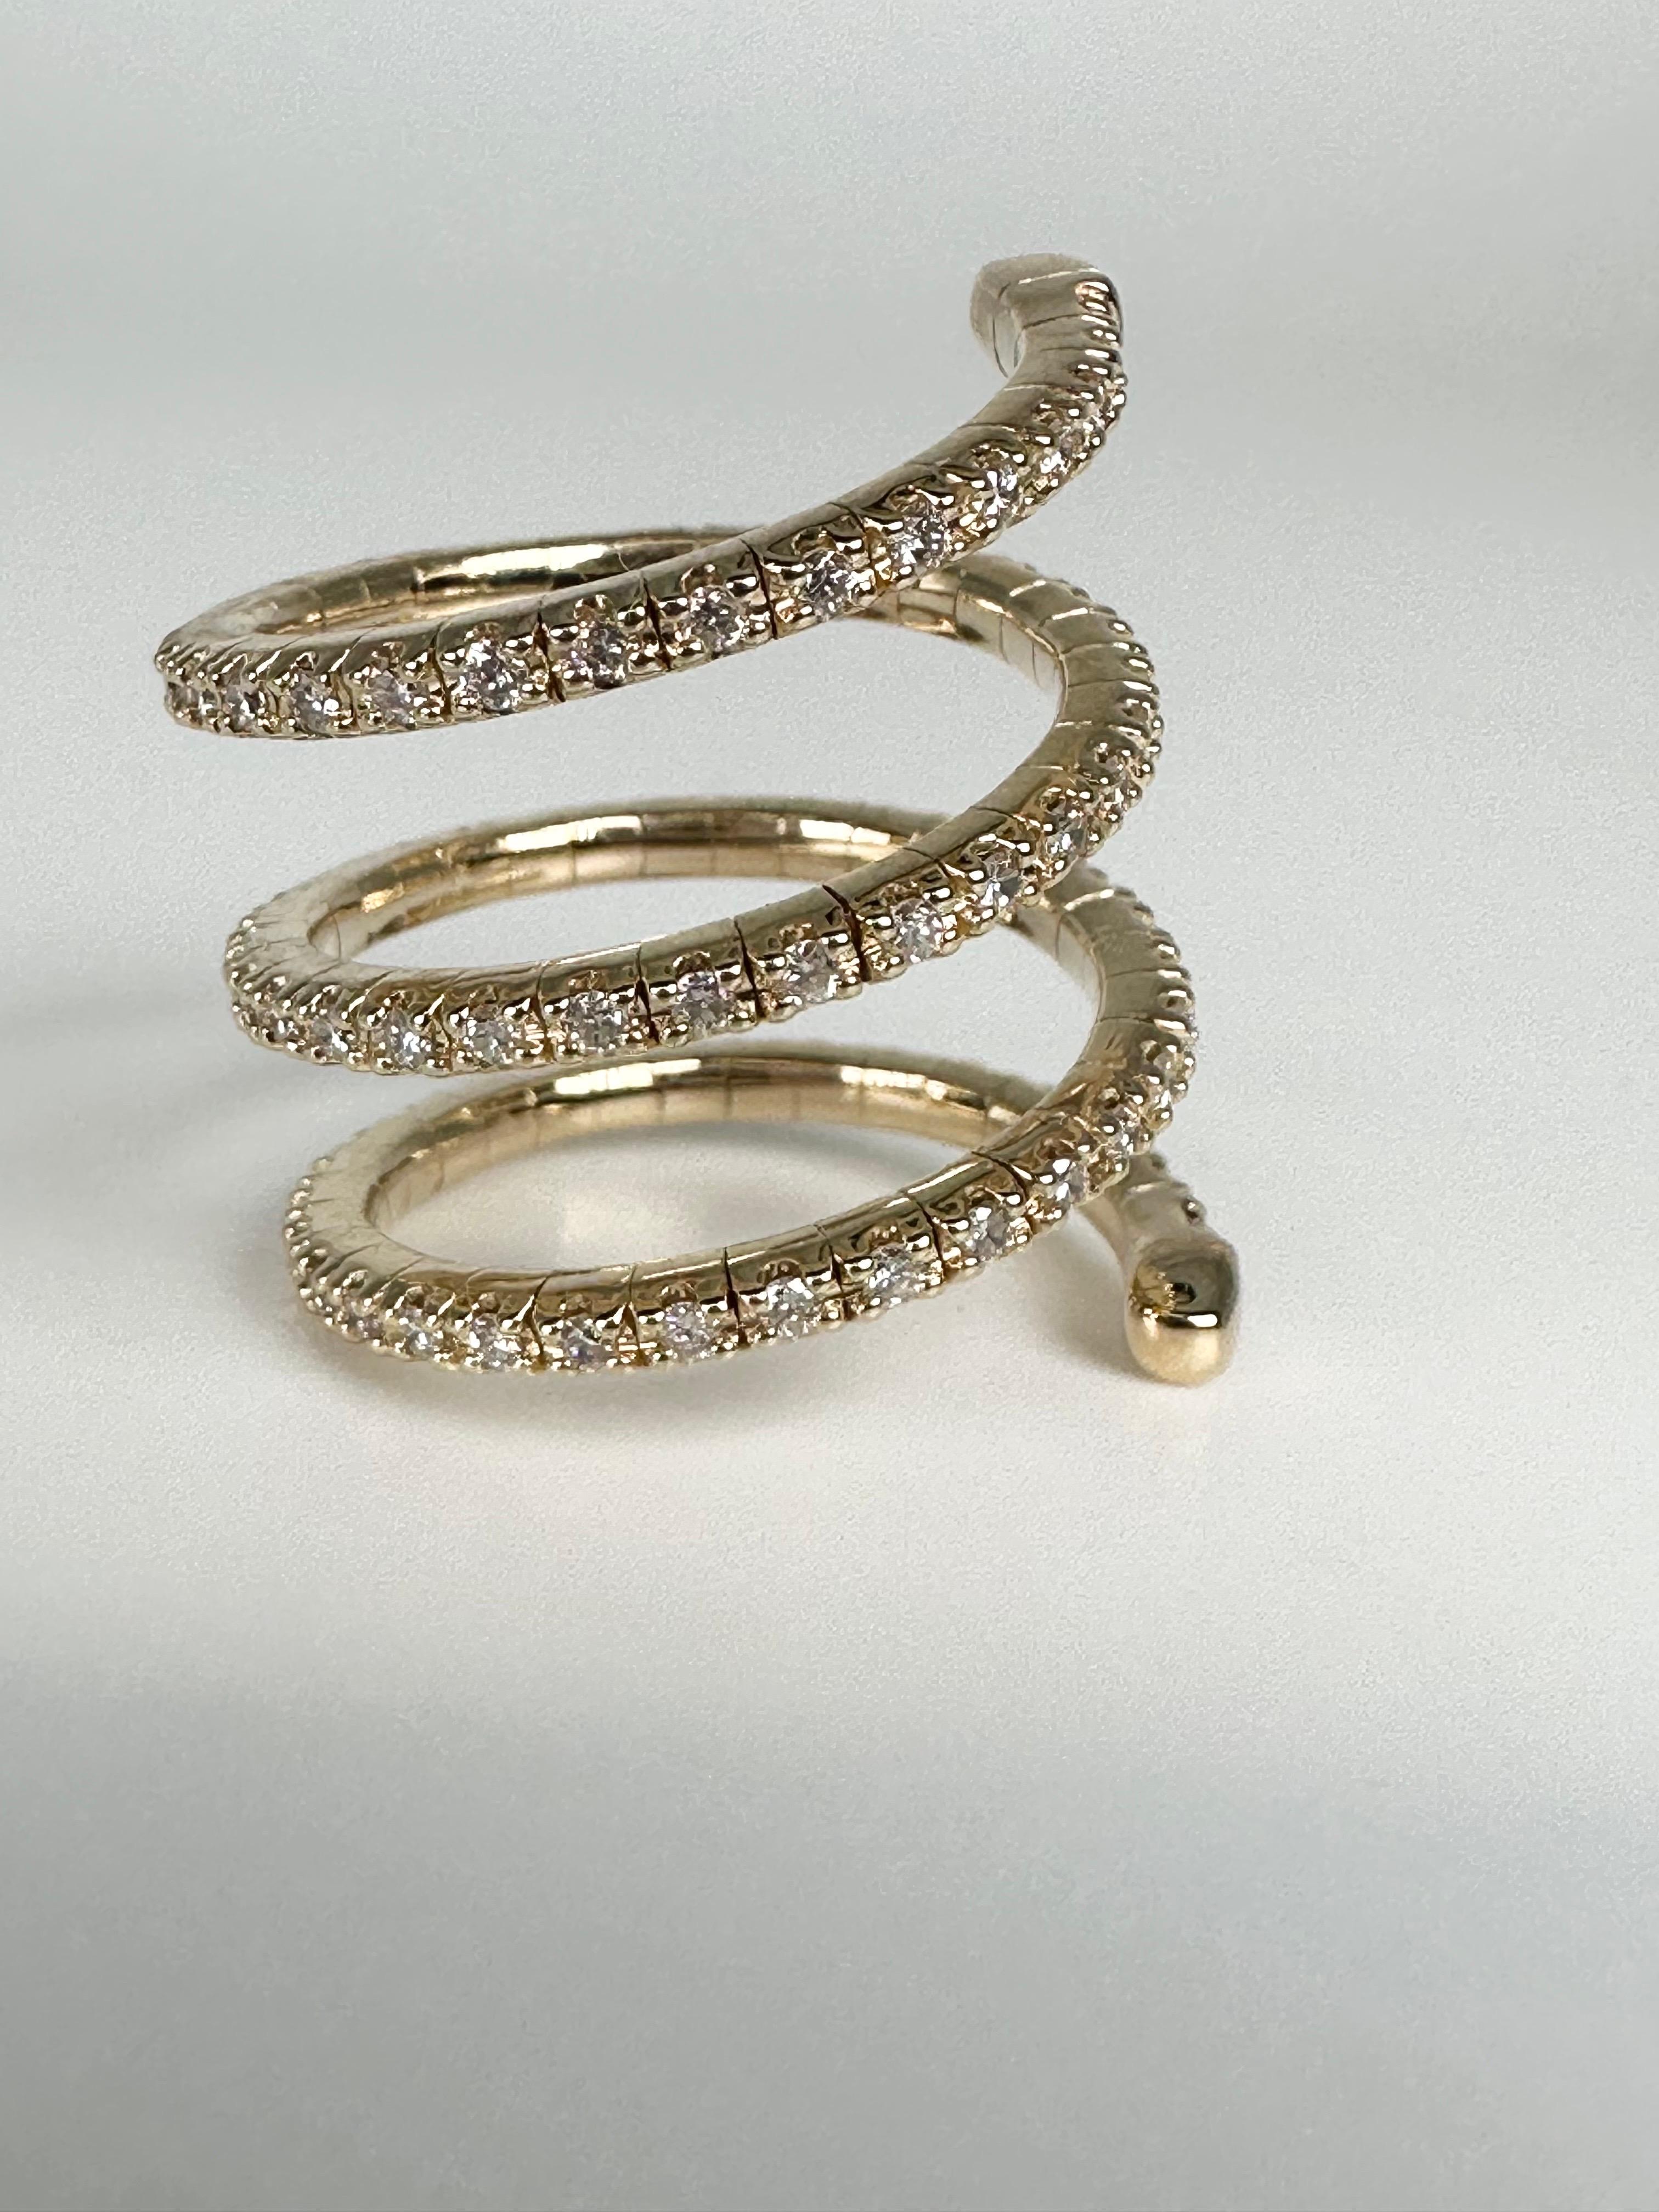 Rare diamond ring, spiral in design, comfortable on finger and suits most finger sizes, a must have for any fashionista! Did i mention its a diamond ring and the spakle is crazy? This is just such a unique ring and i know you will enjoy it!